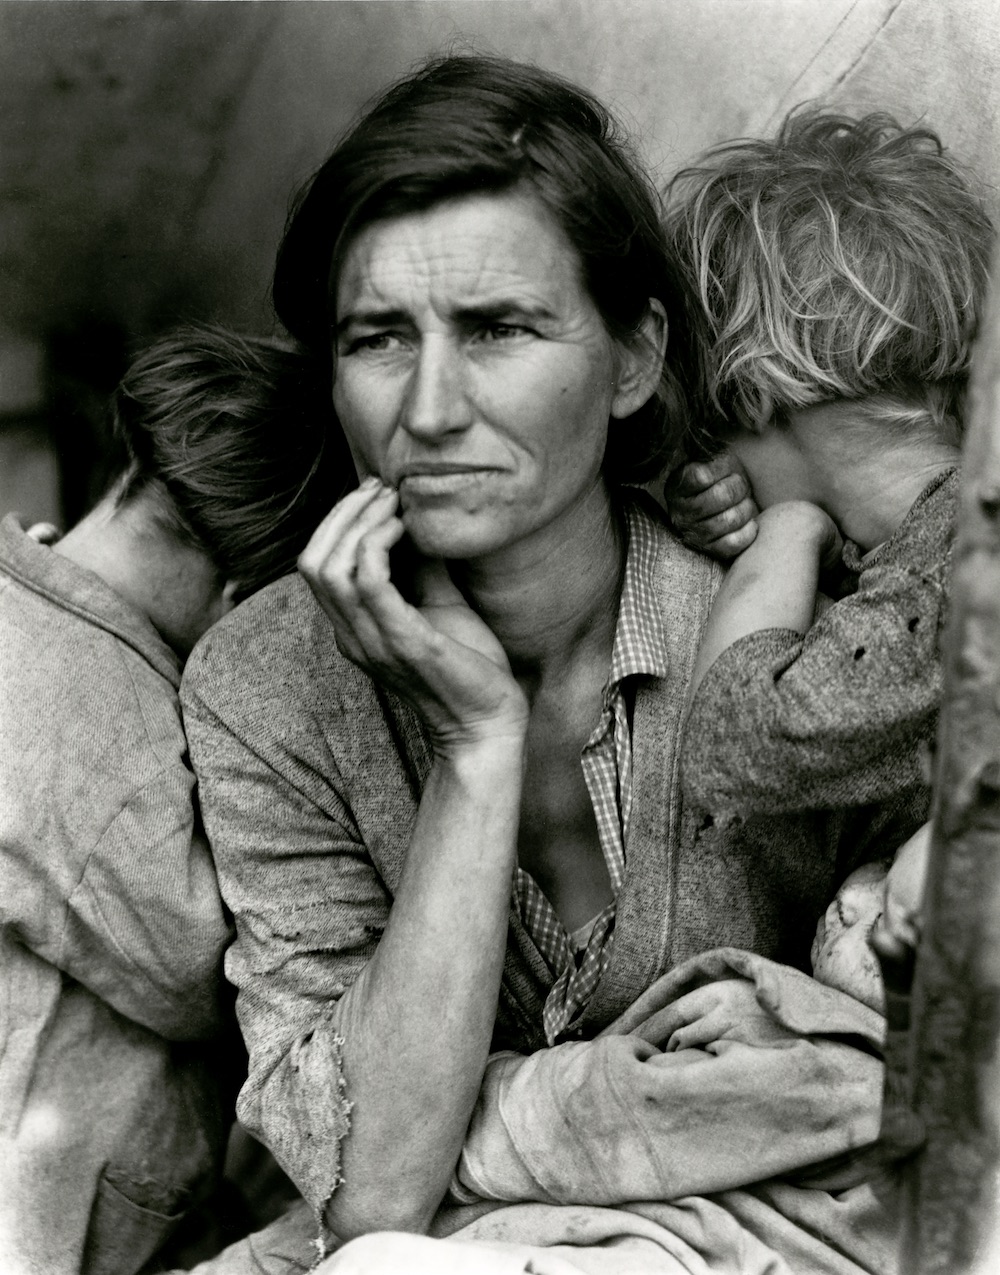 Dorothea Lange, "Migrant Mother," Nipomo, California, 1937, courtesy to the artist and The Dorothea Lange Collection, Oakland Museum of California.